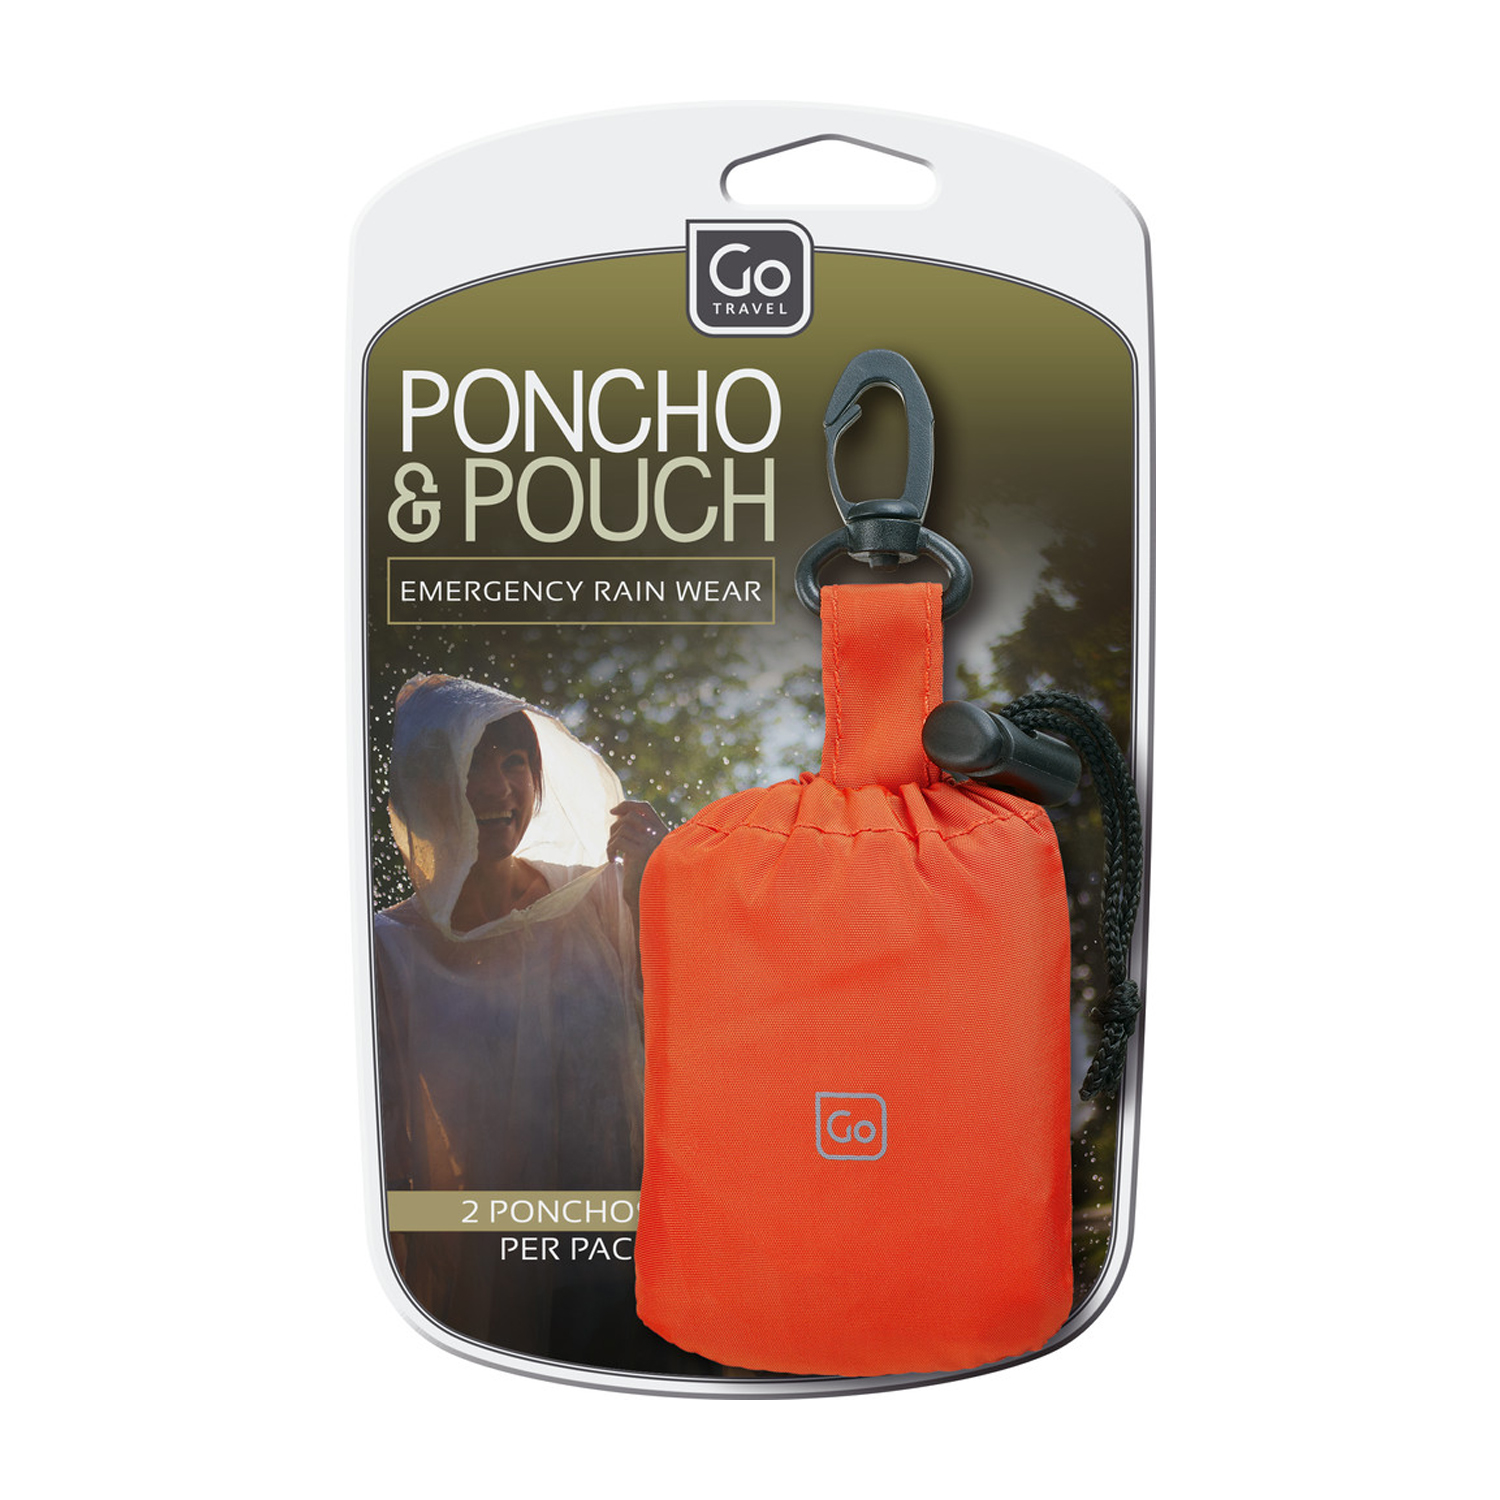 Go Travel Regnponcho 2-pack